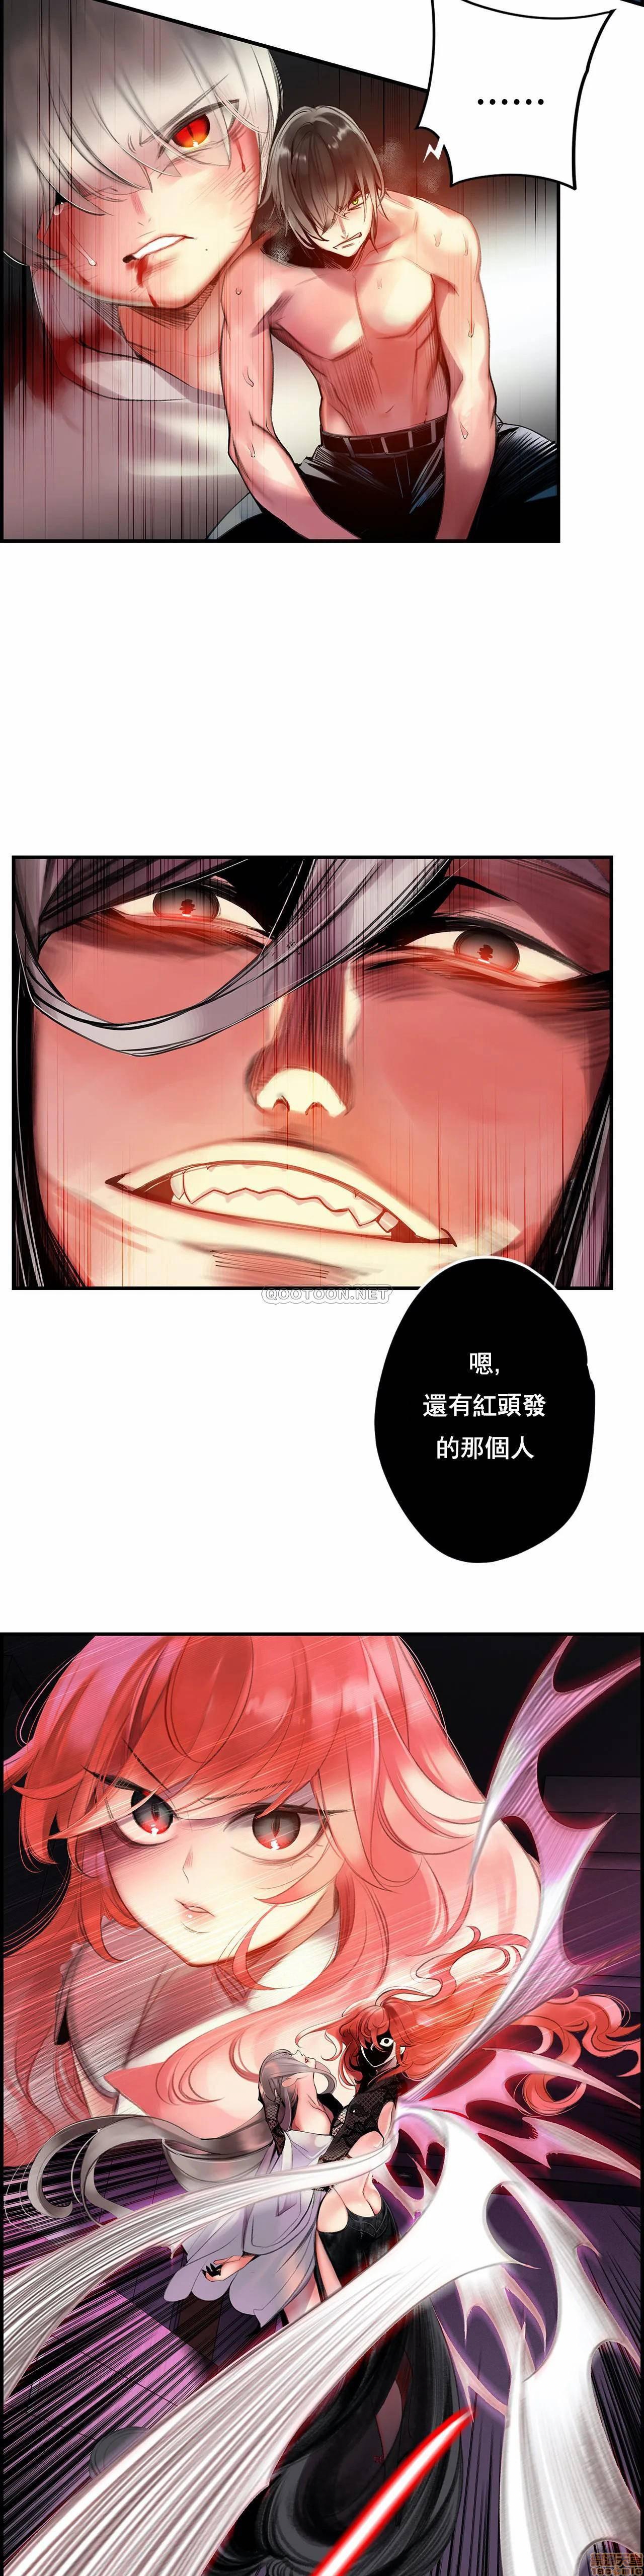 [Juder] Lilith`s Cord (第二季) Ch.77-93 end [Chinese] 115